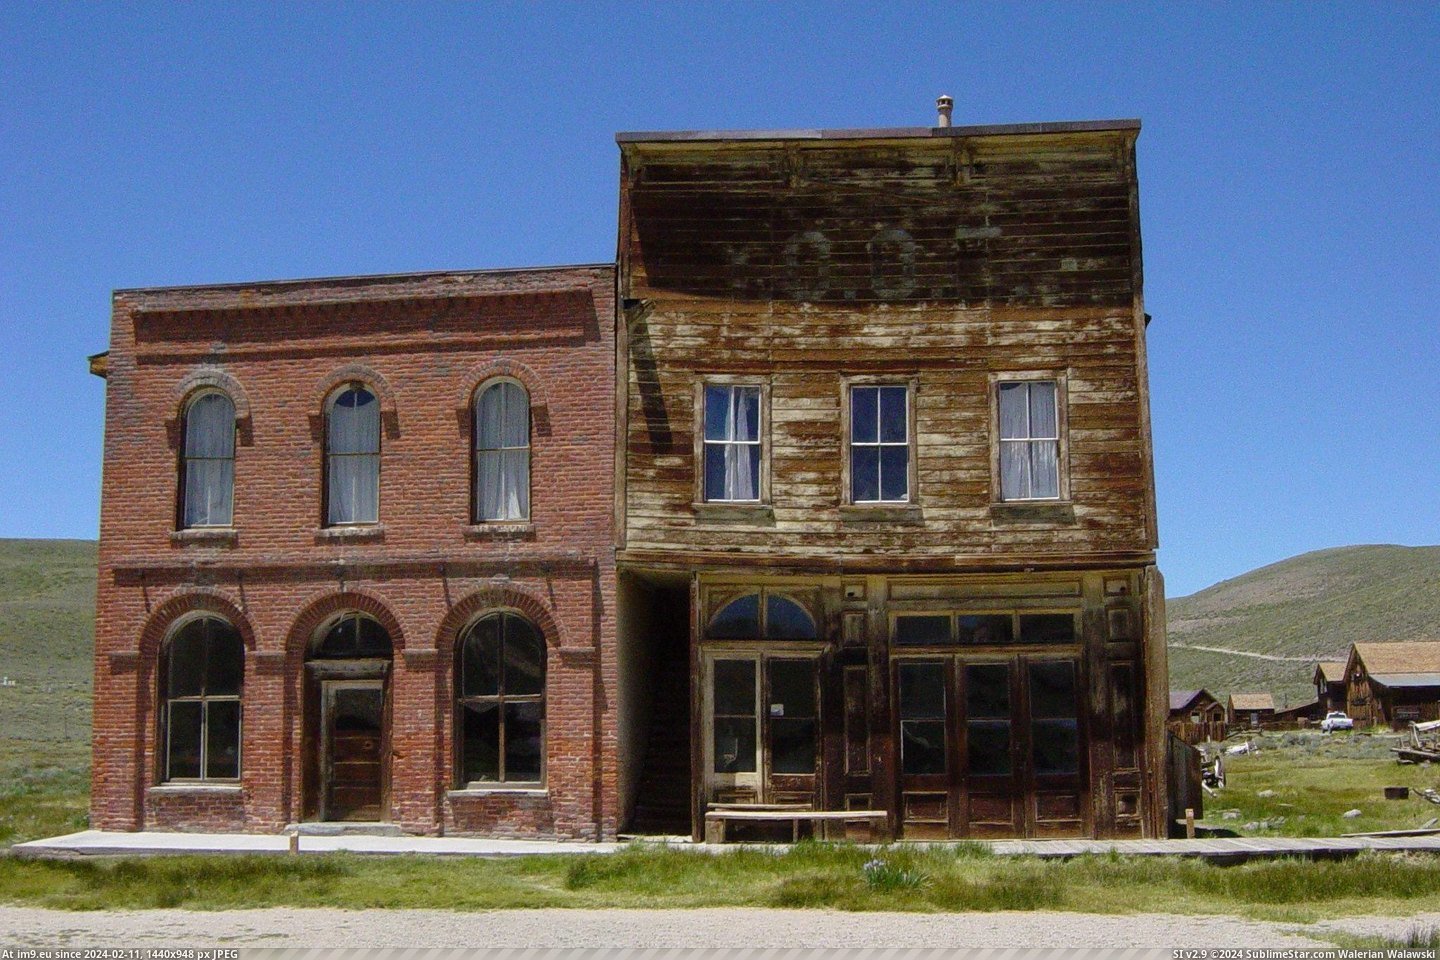 #California #Office #Ioof #Hall #Bodie Ioof Hall And Post Office In Bodie, California Pic. (Изображение из альбом Bodie - a ghost town in Eastern California))